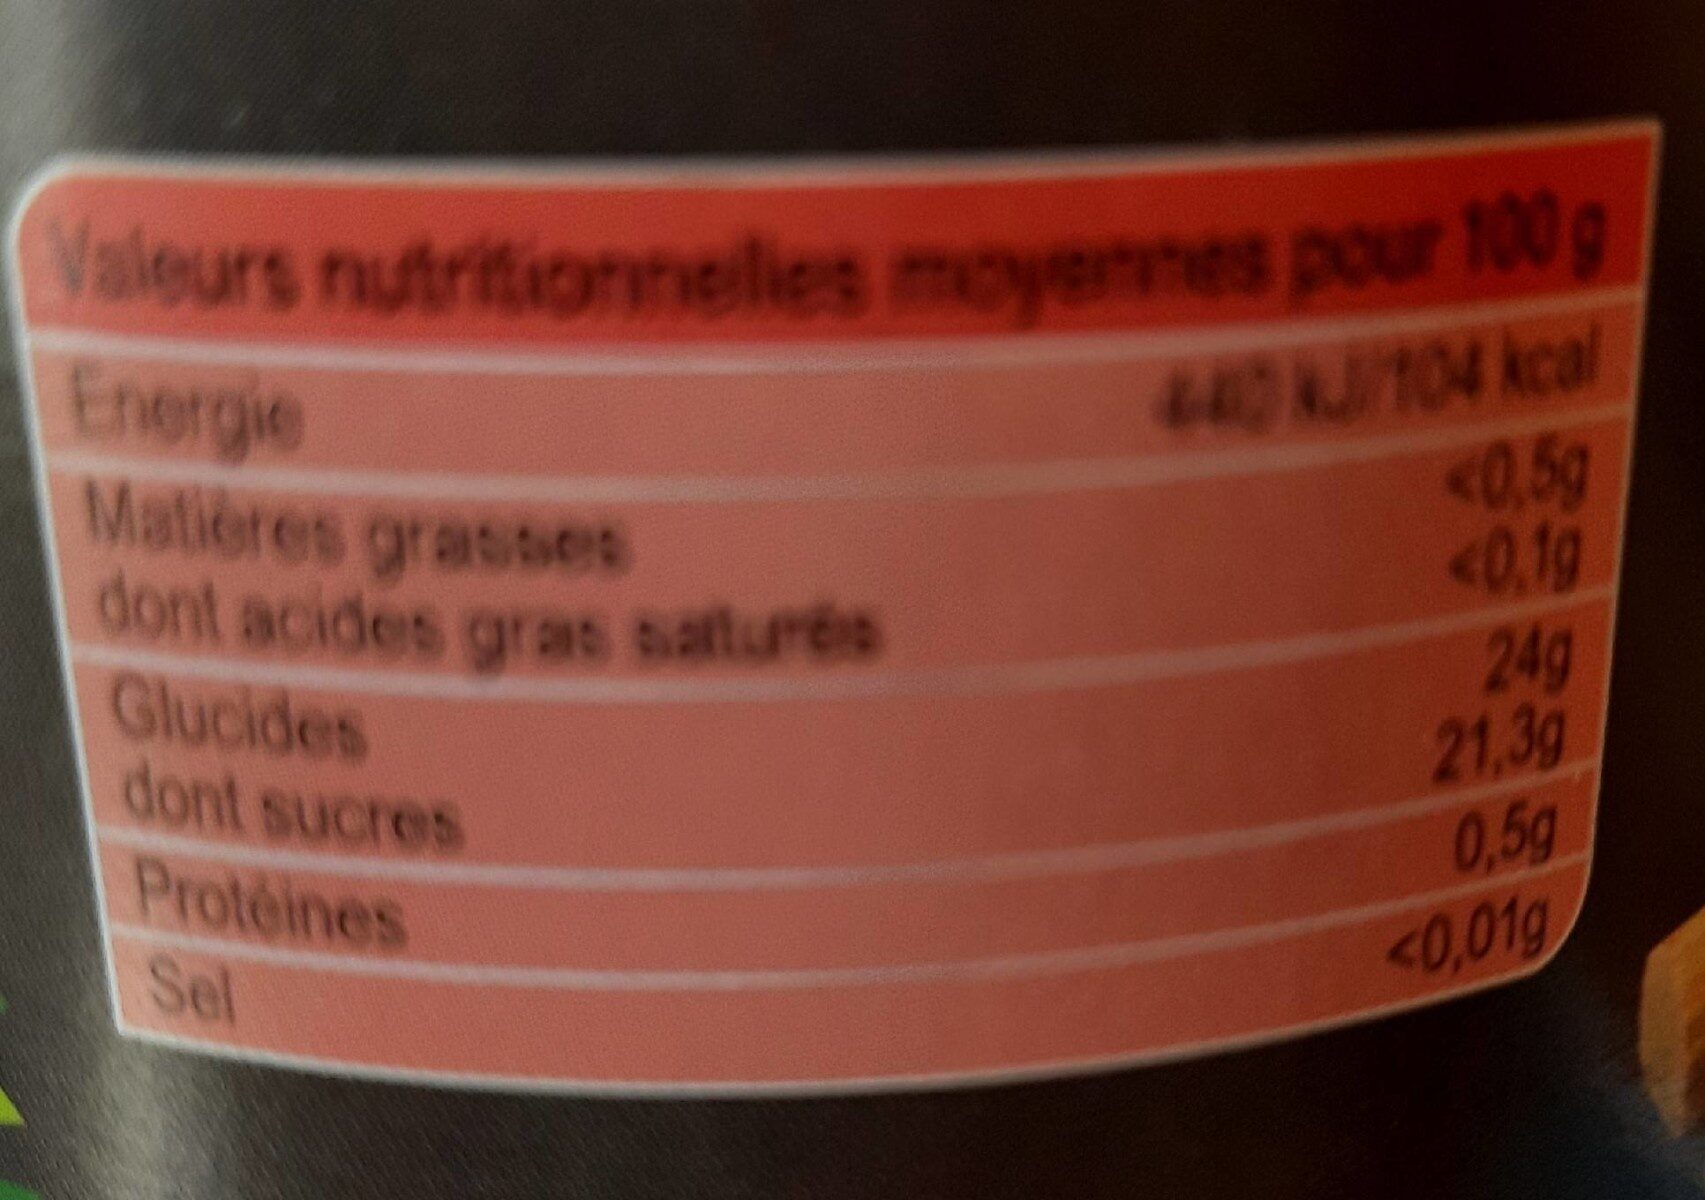 Compote de rhubarbe - Nutrition facts - fr